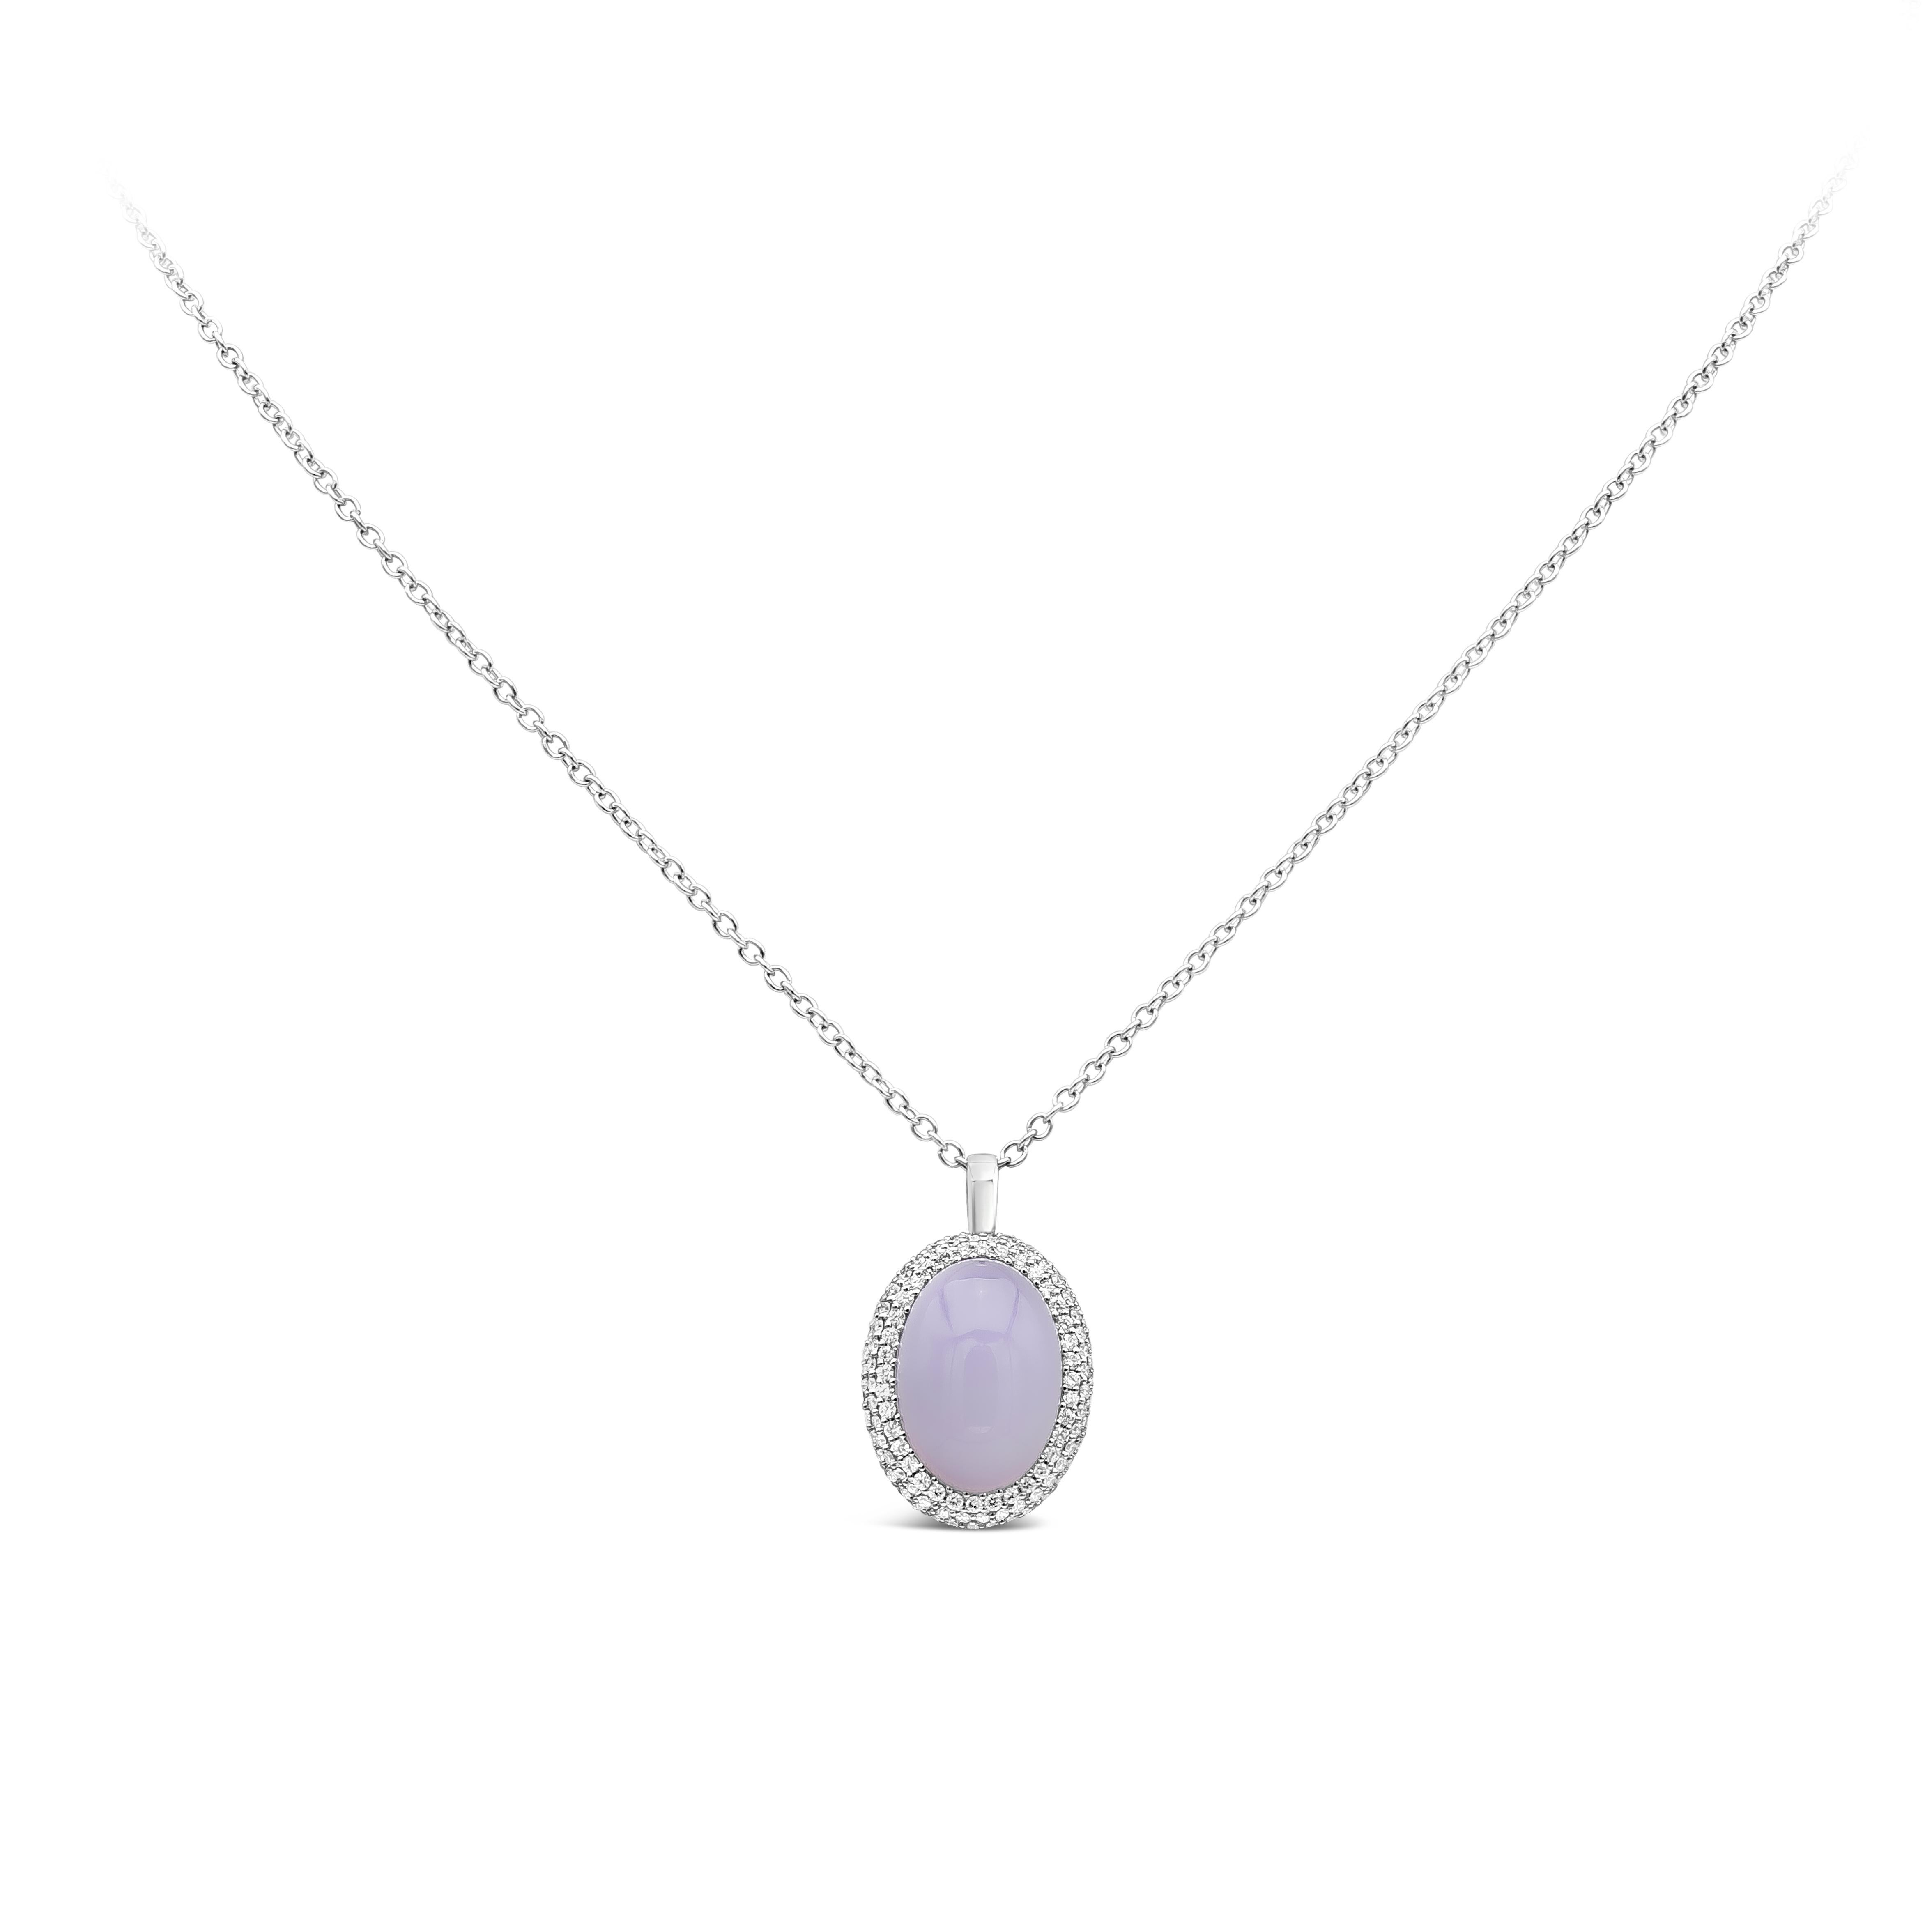 A fashionable pendant necklace showcasing an oval lavender chalcedony weighing 7 carat. Center stone is accented with bright round diamonds weighing 0.79 carats total, F color and VS clarity.
Made in 18 karats white gold.

Roman Malakov is a custom